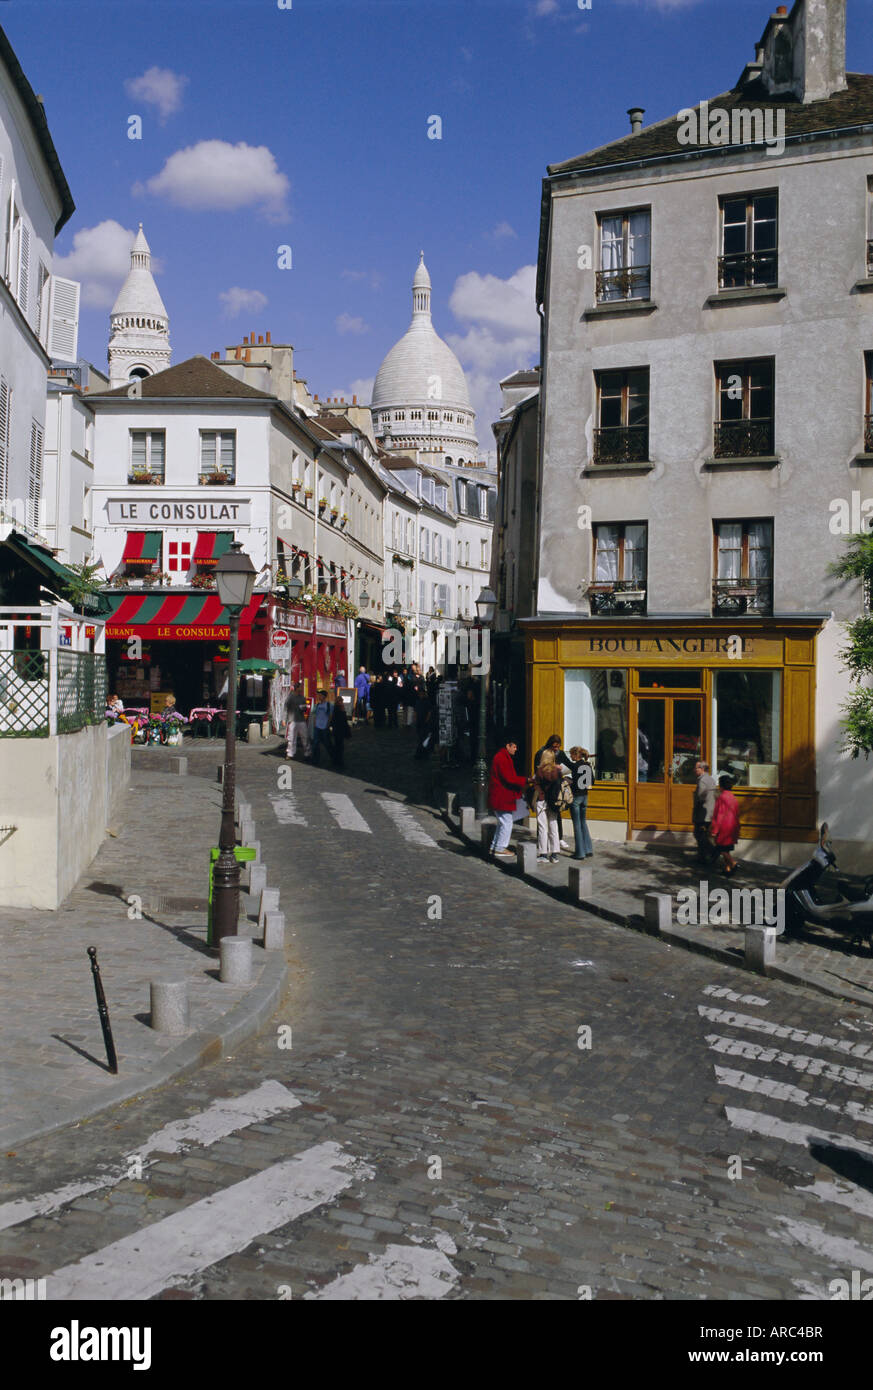 Street scene and the dome of the basilica of Sacre Coeur, Montmartre, Paris, France, Europe Stock Photo